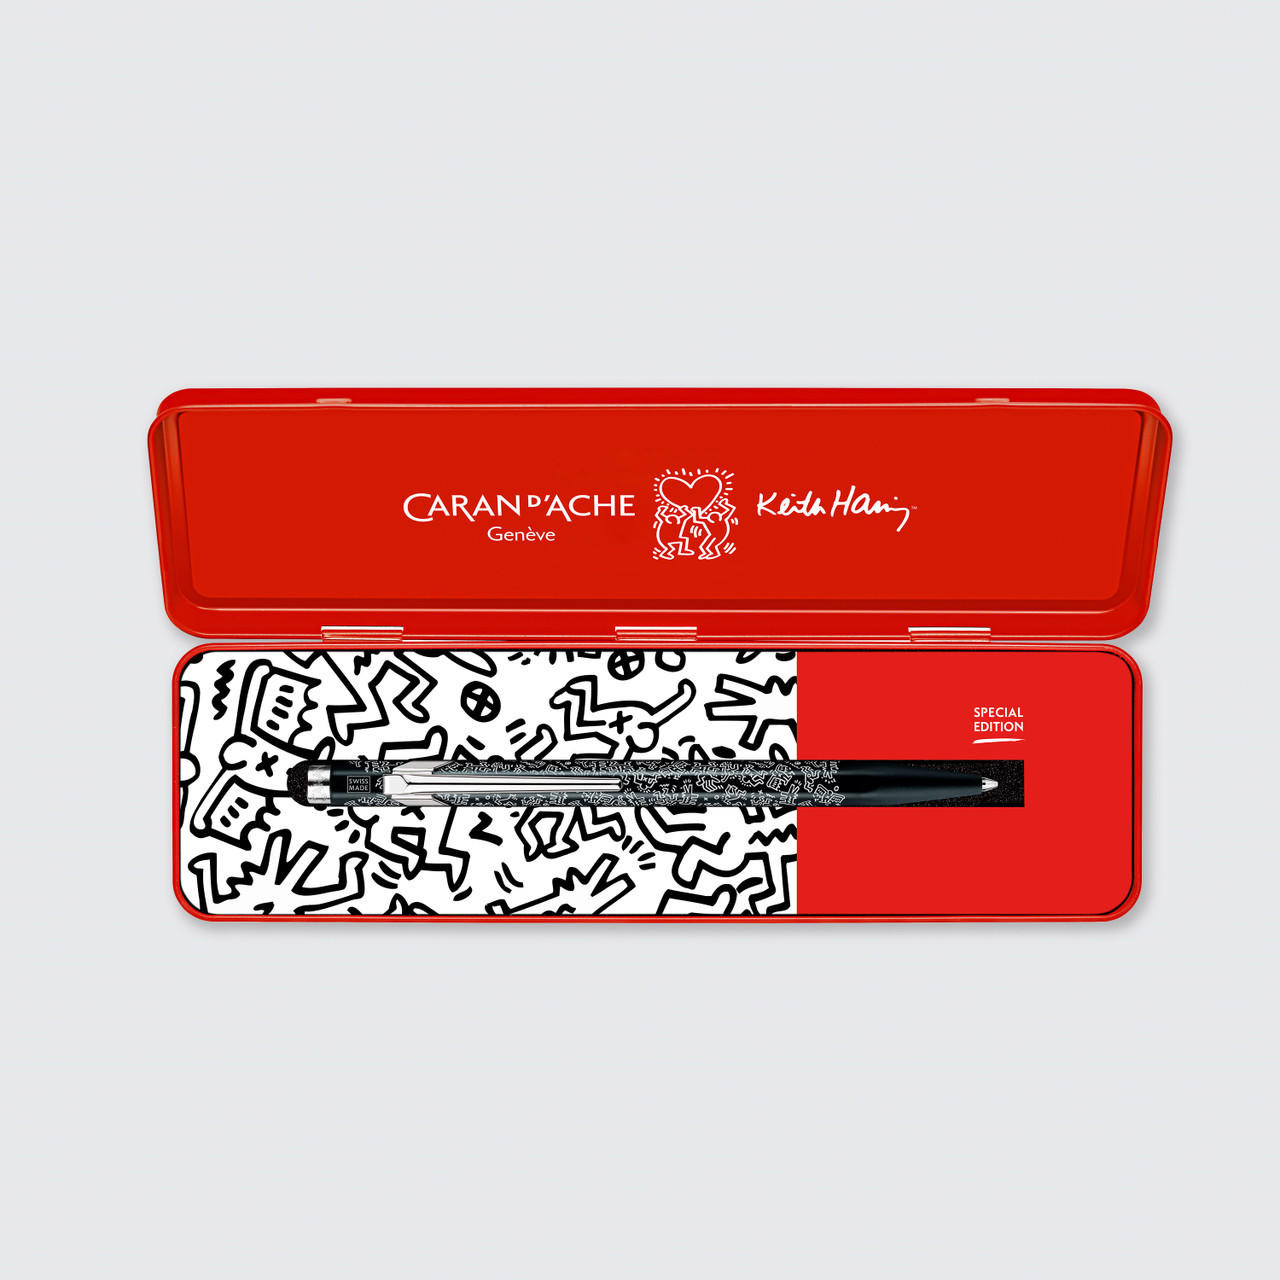 Caran D’ache Keith Haring 849 Ballpoint Pen and Refill in Metal Box Black Set